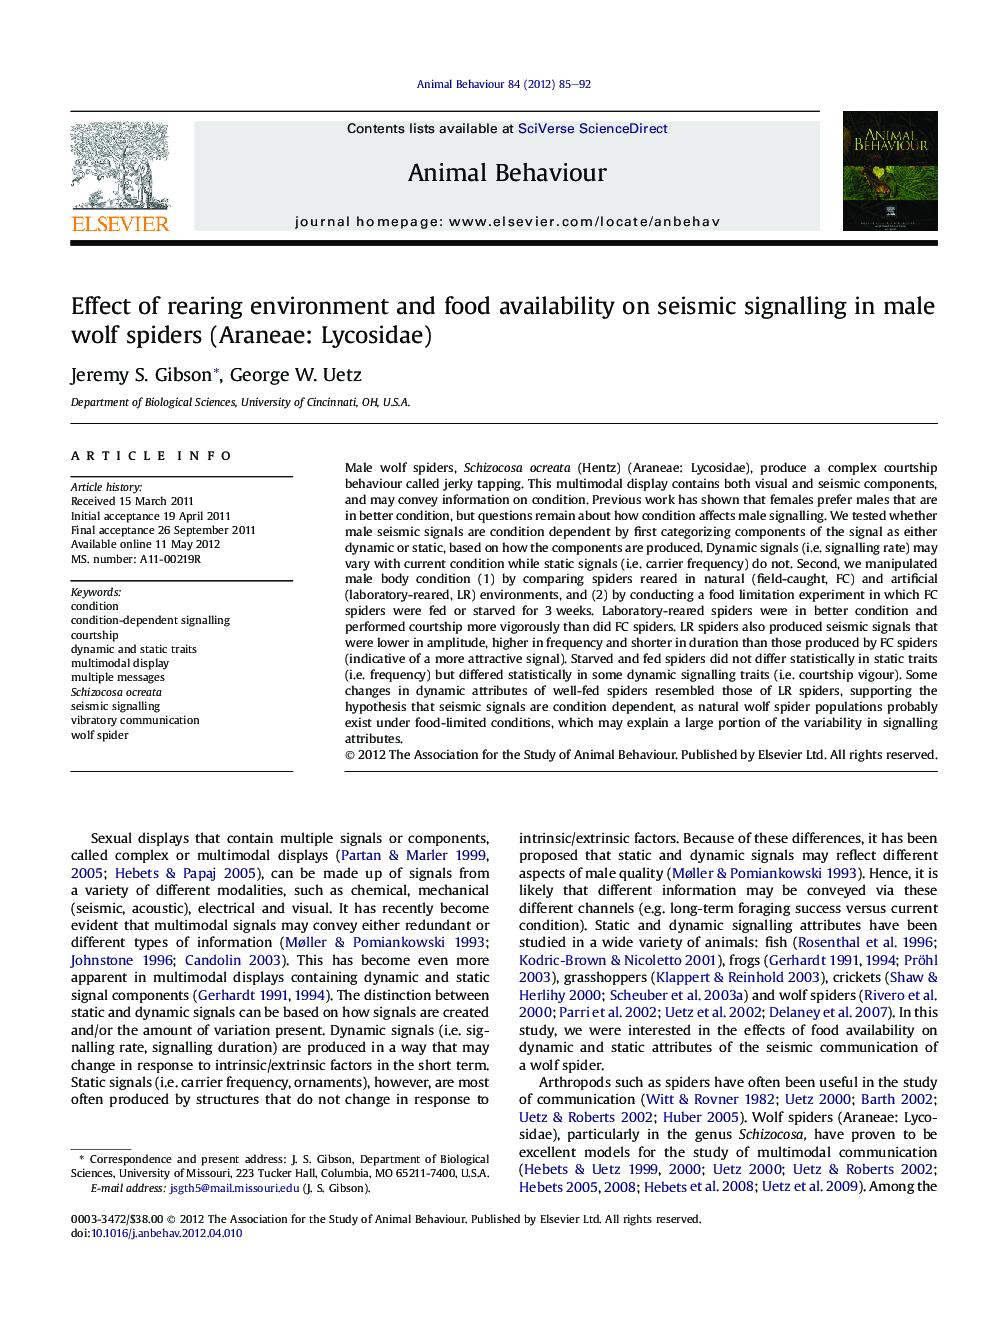 Effect of rearing environment and food availability on seismic signalling in male wolf spiders (Araneae: Lycosidae)